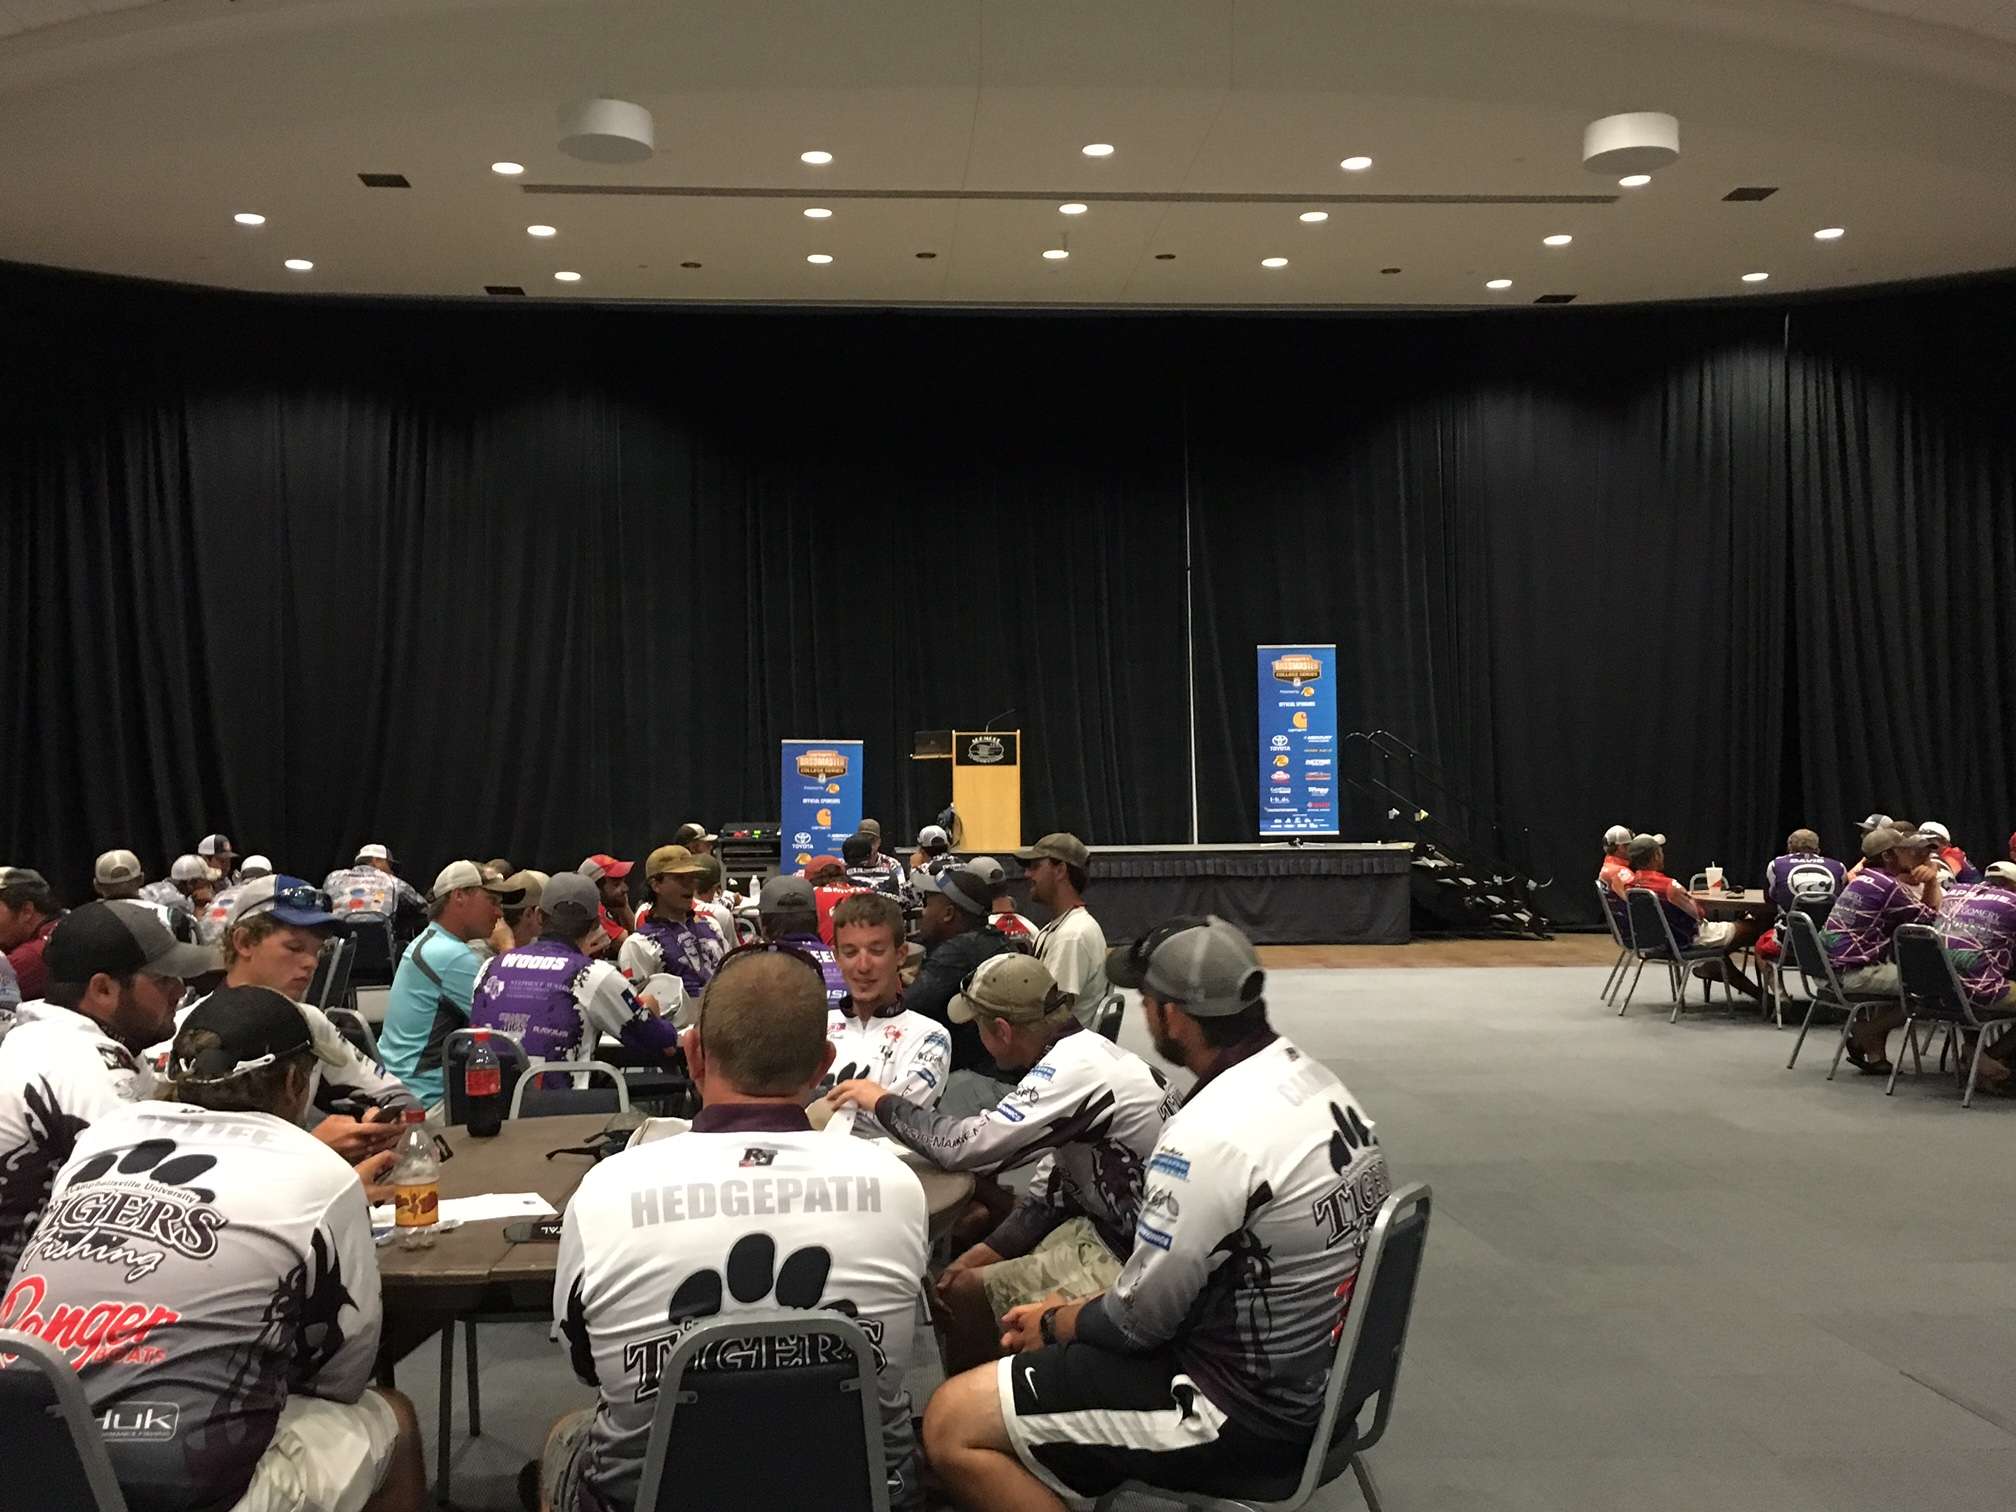 Anglers from all five regionals have gathered for the Wild Card, hoping to make it to the Championship. 